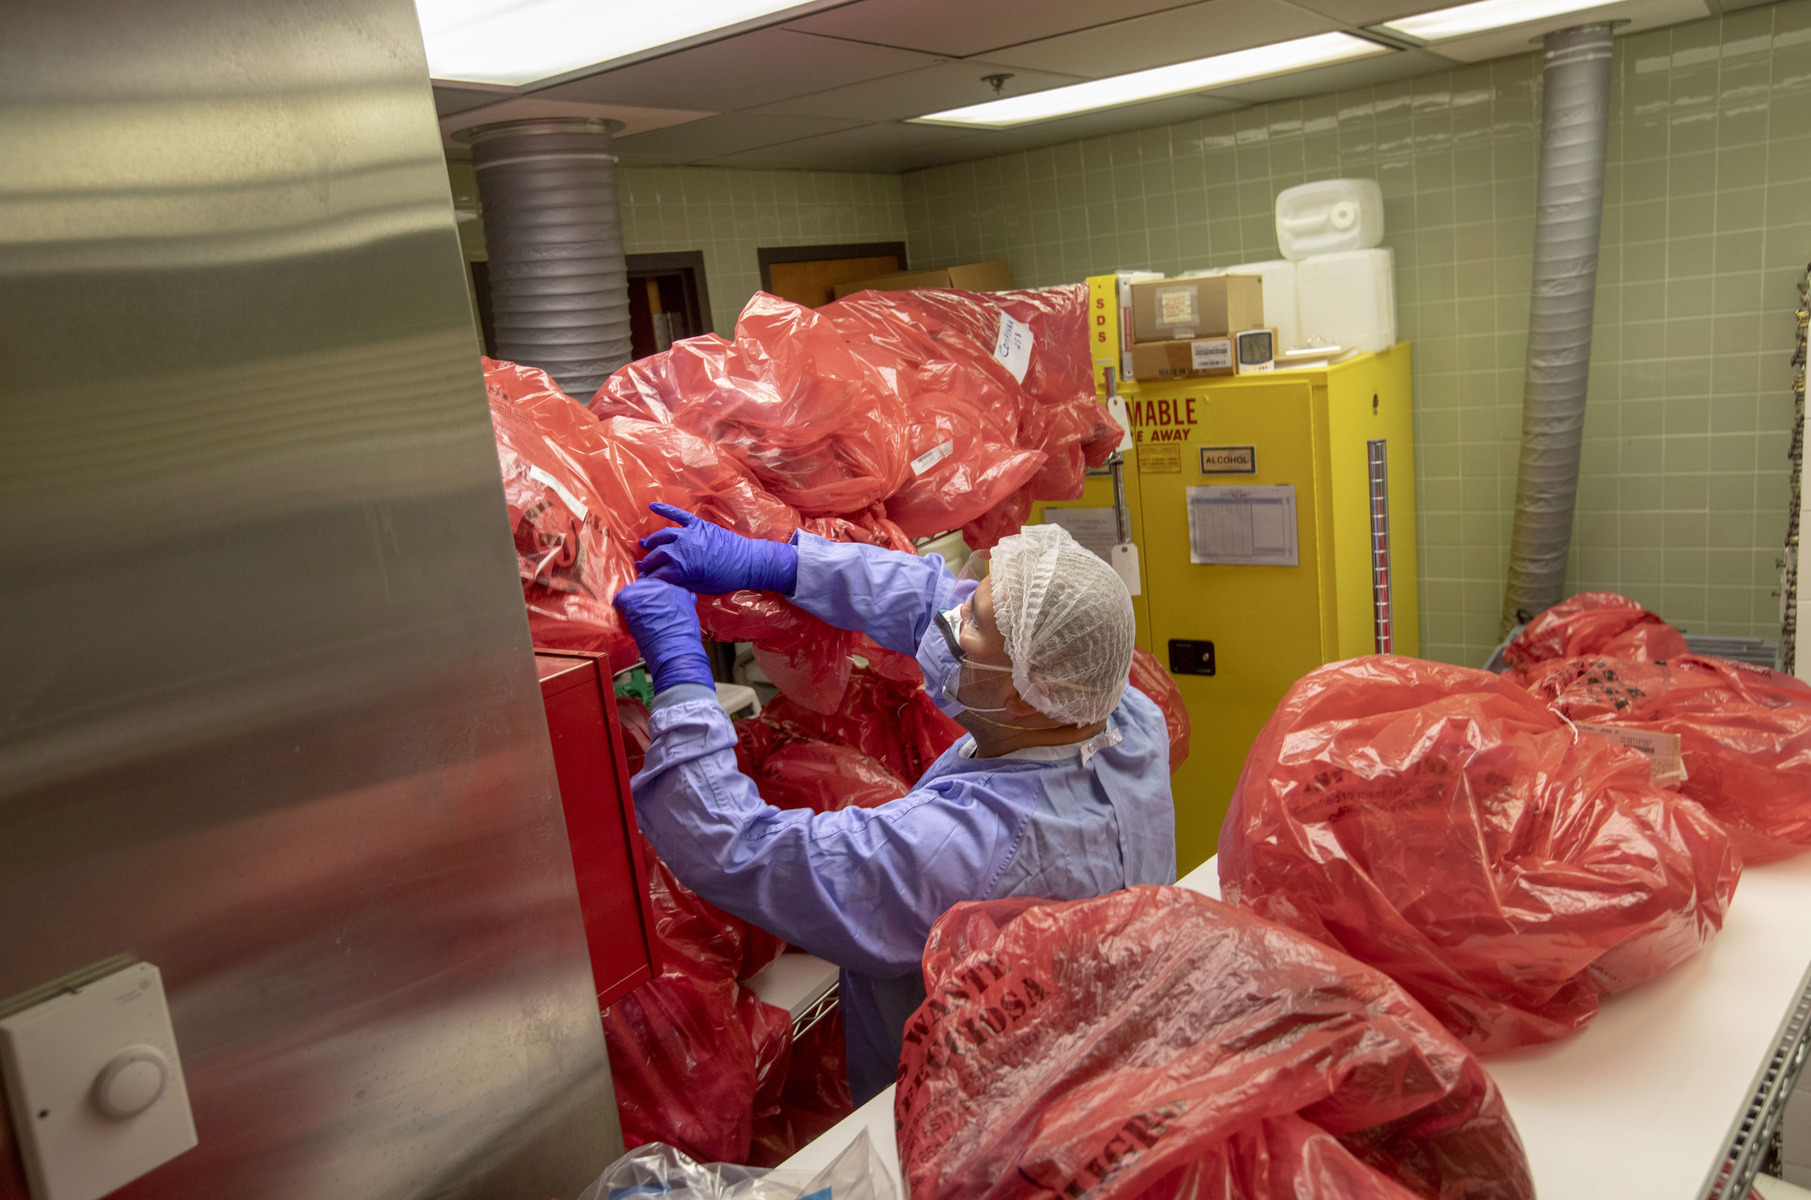 A histologist looks for patients belongings to return to family members in the morgue during the COVID-19 pandemic. 5/6/2020 Photo by Jeff Rhode